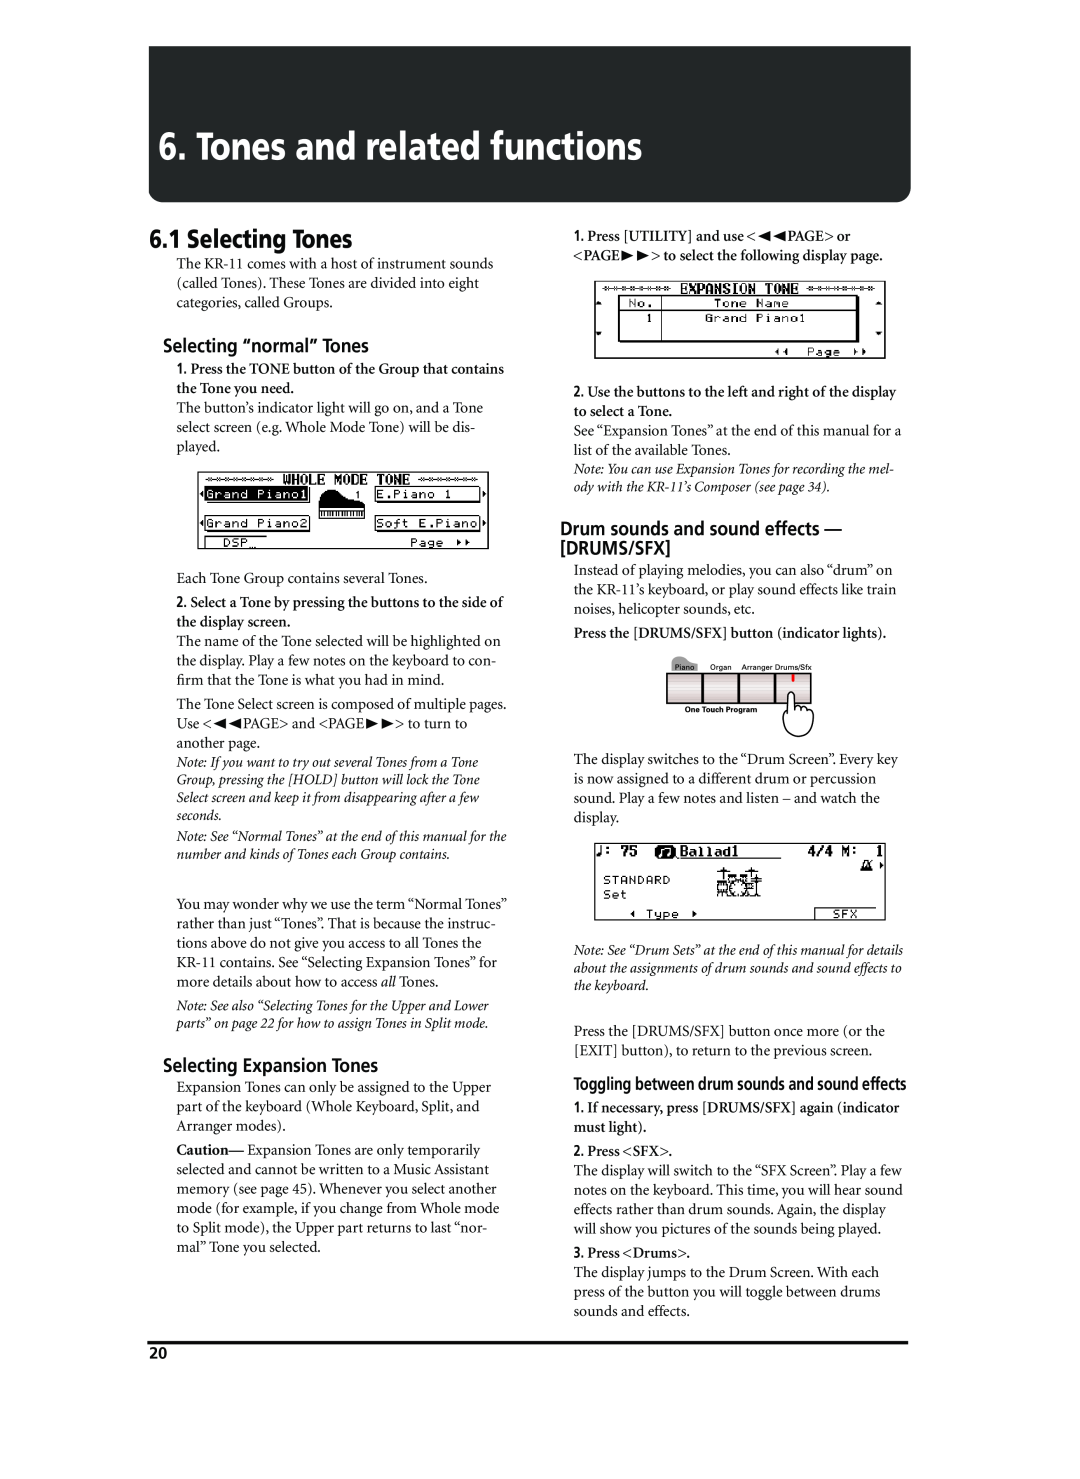 Roland KR-11 owner manual Tones and related functions, Selecting Tones, Selecting “normal” Tones, Selecting Expansion Tones 